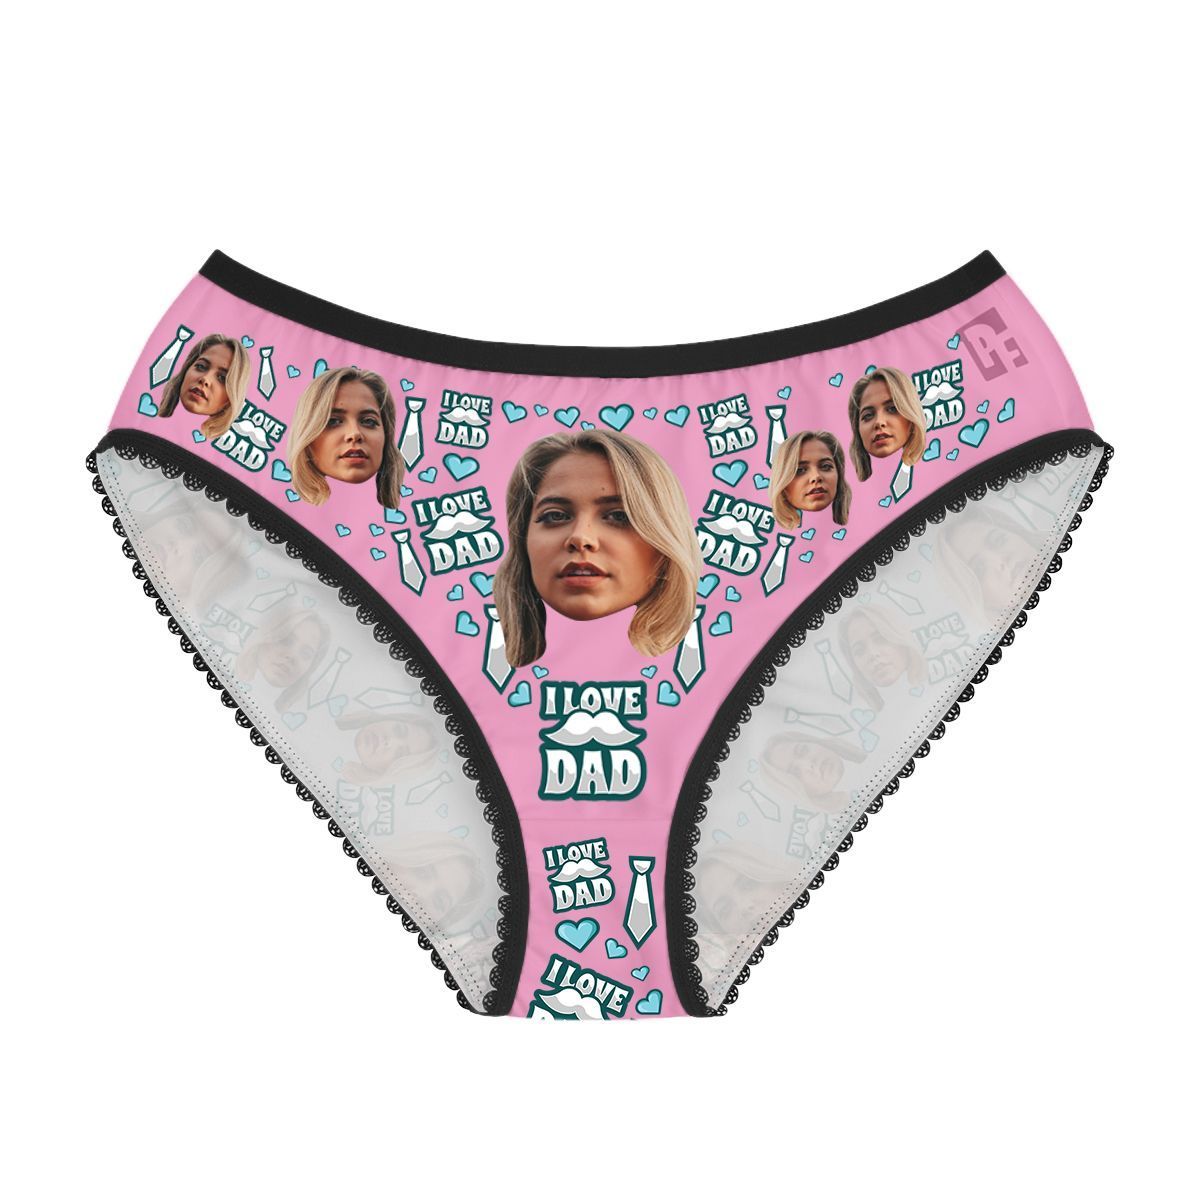 Pink Love dad women's underwear briefs personalized with photo printed on them